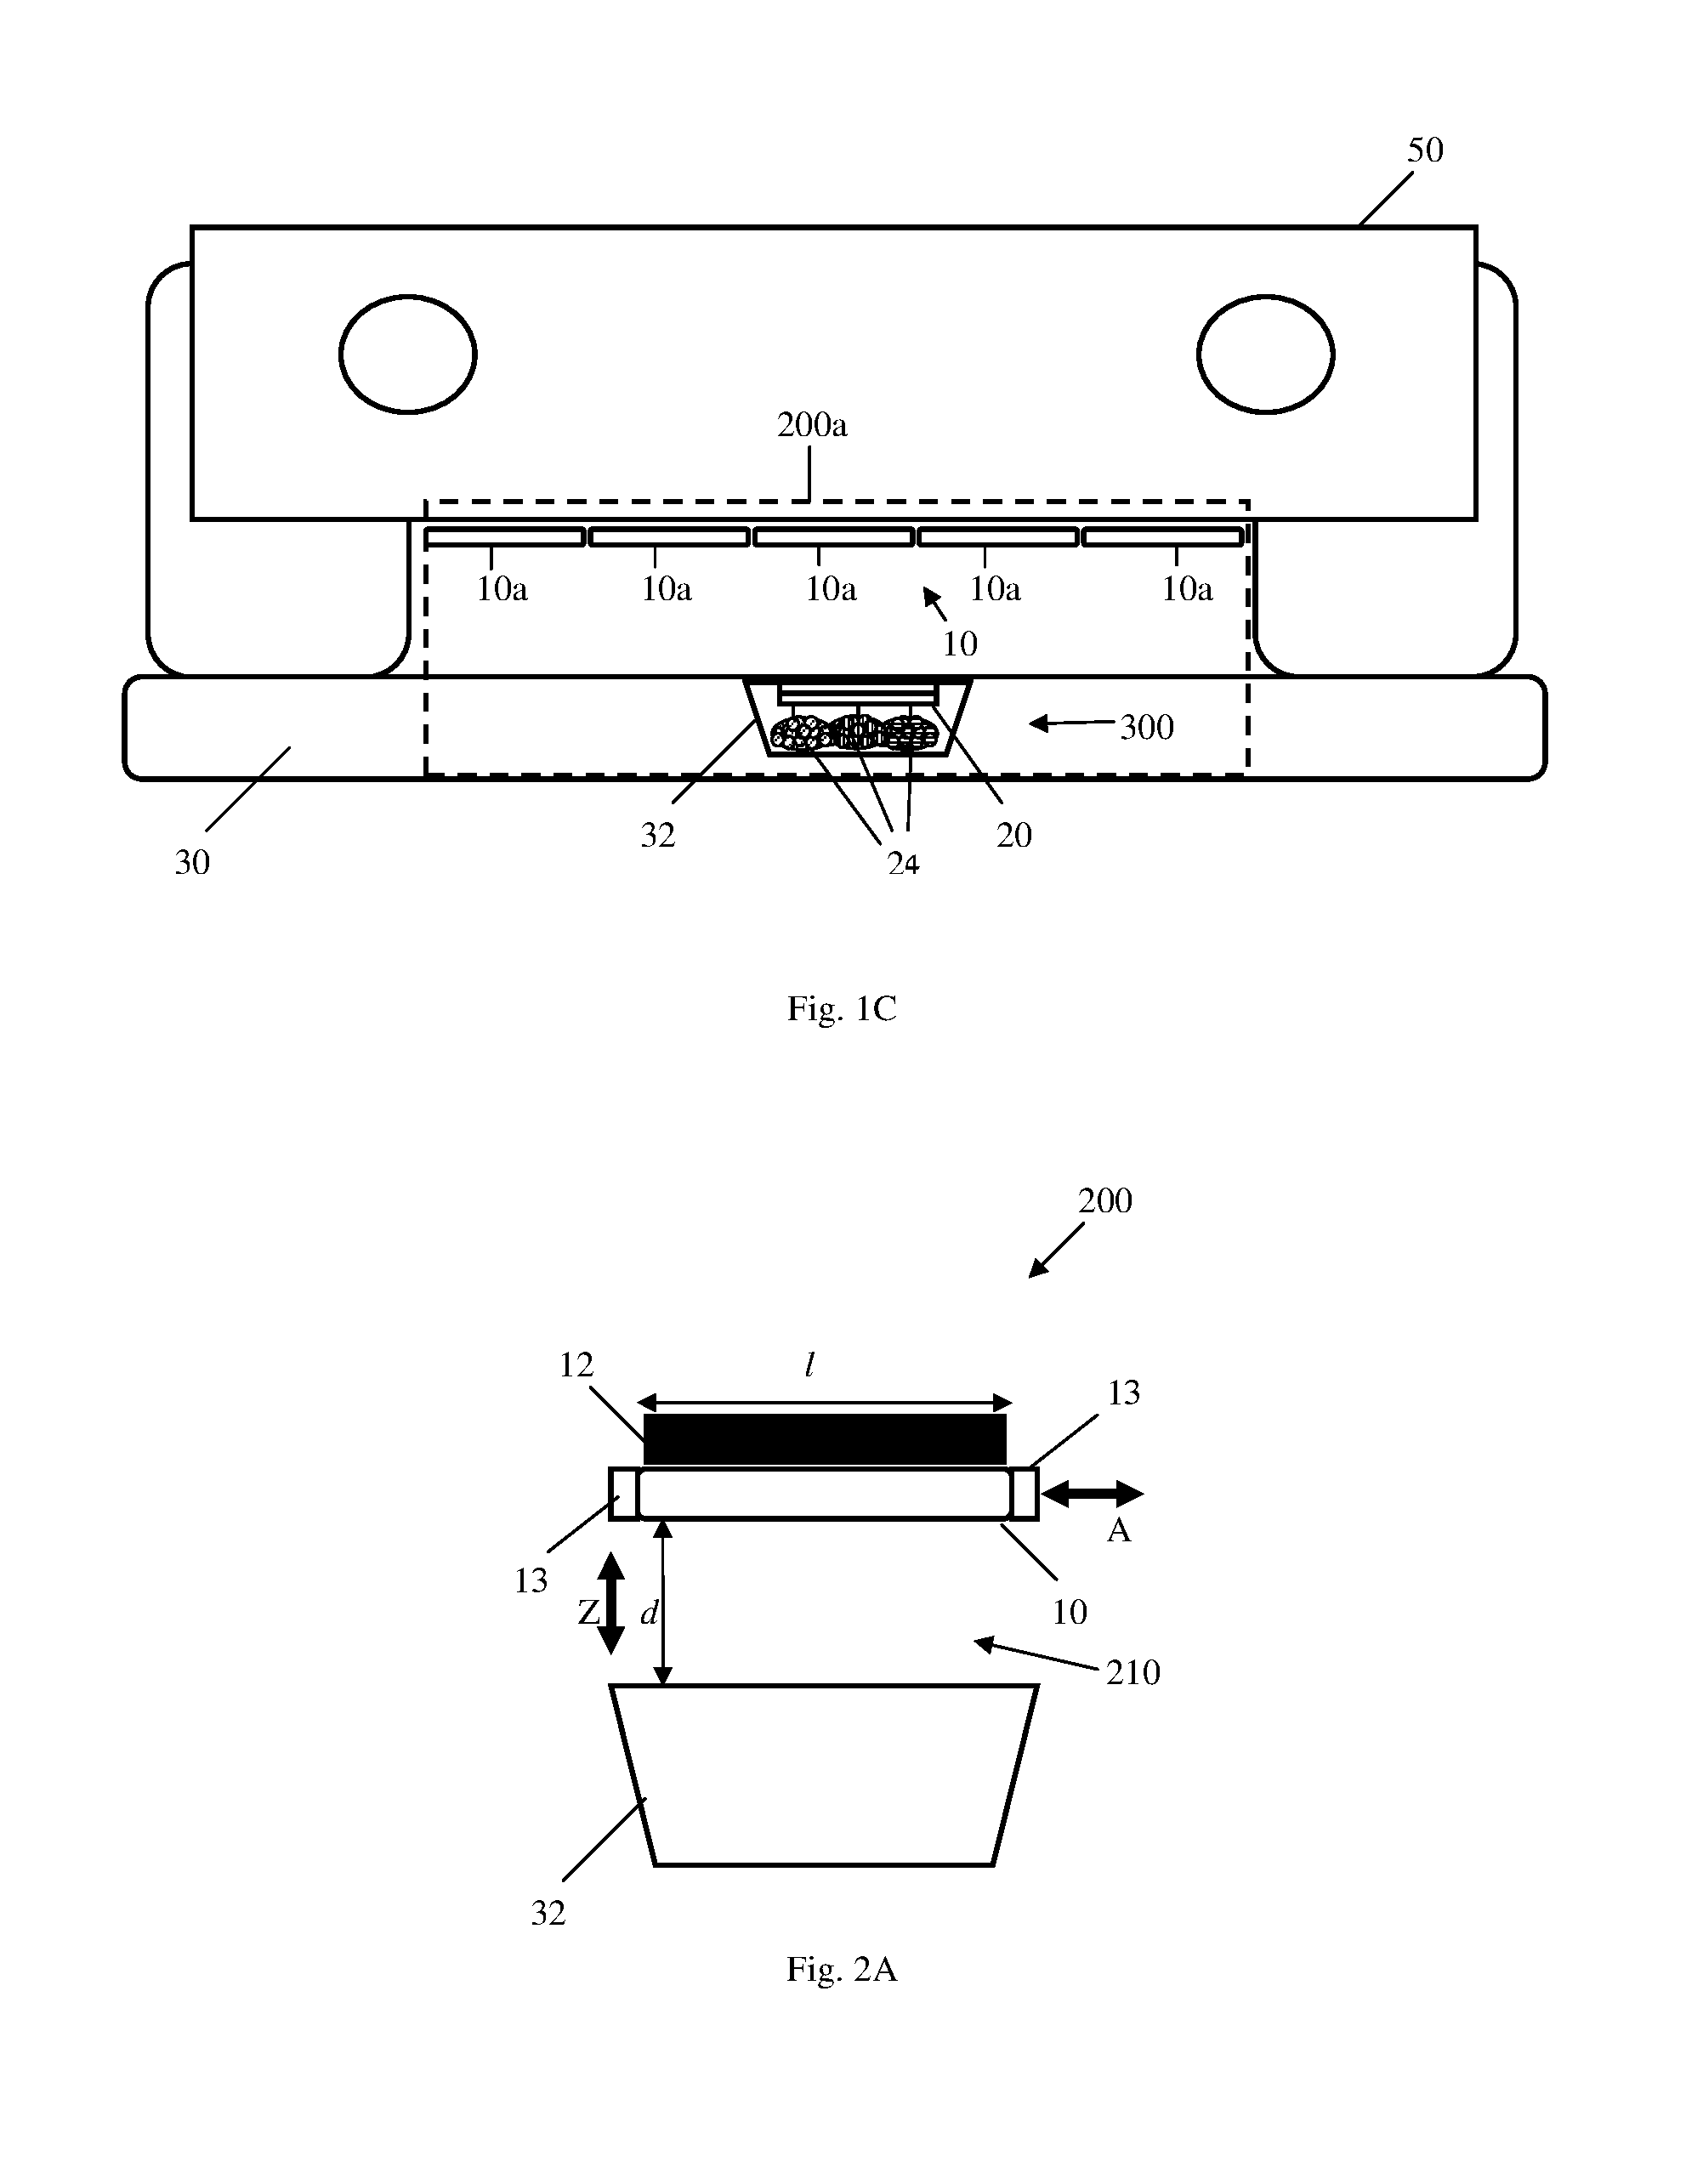 System and method for powering on-road electric vehicles via wireless power transfer